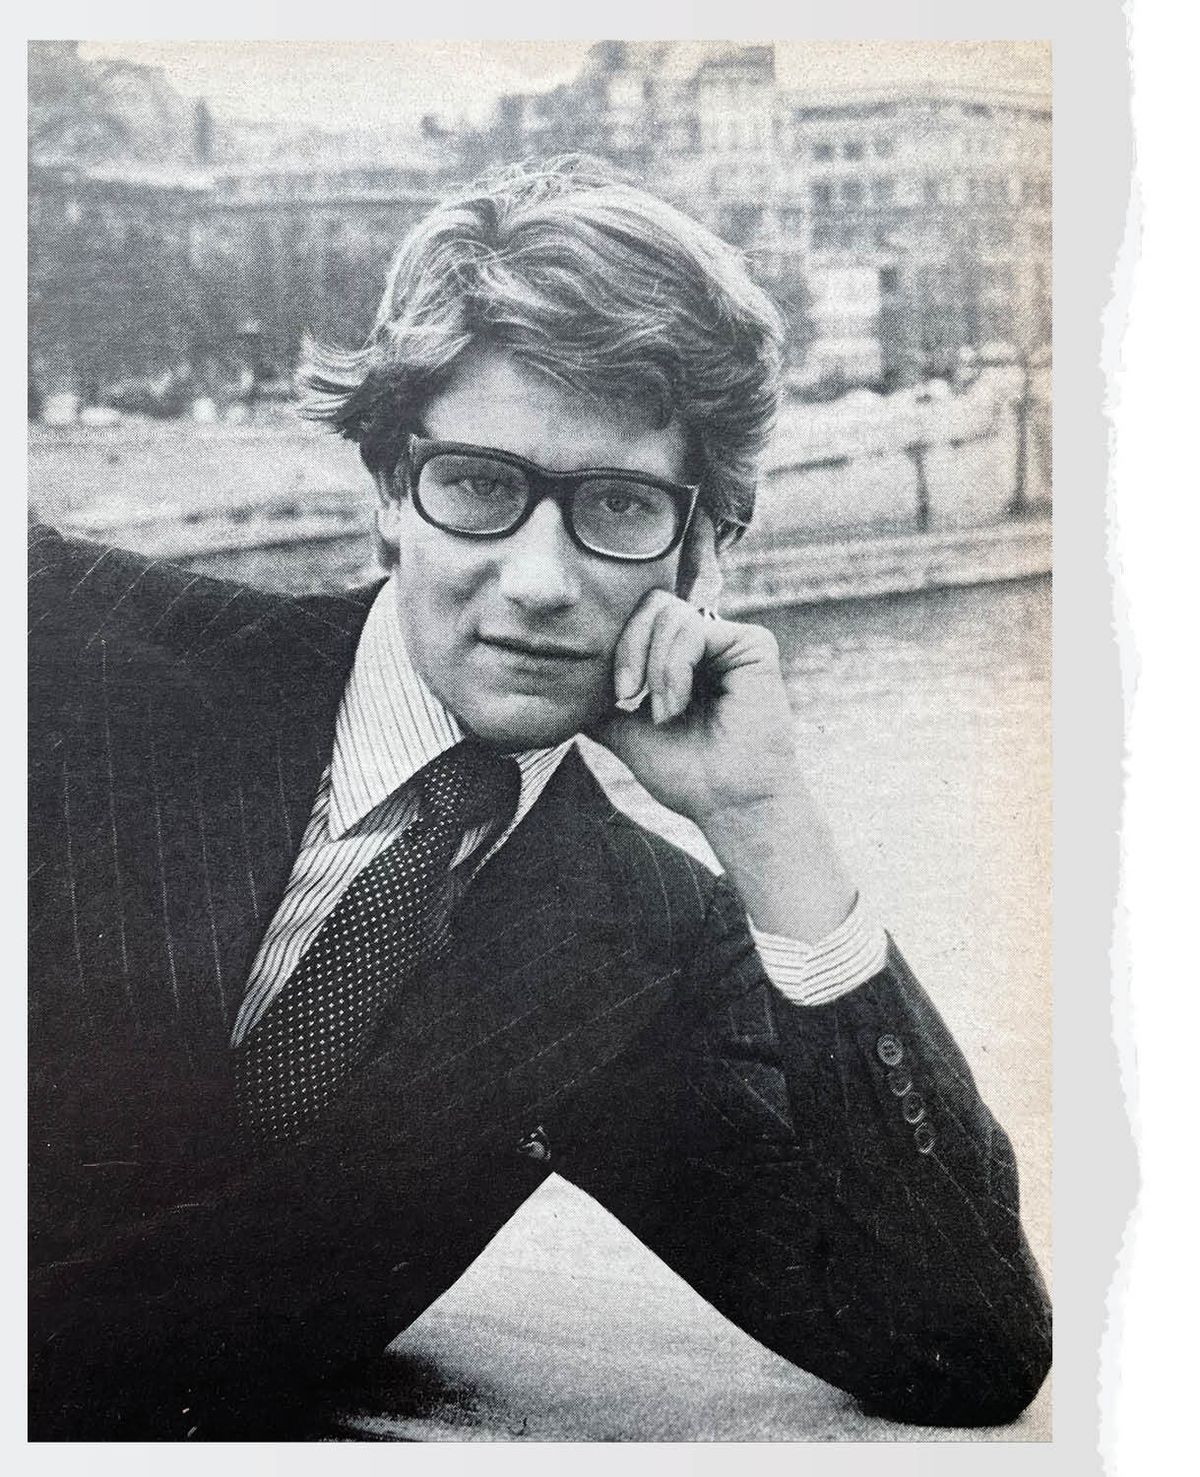 Schaap Maan oppervlakte federatie Here Are Yves Saint Laurent's Thoughts on Color in 1977